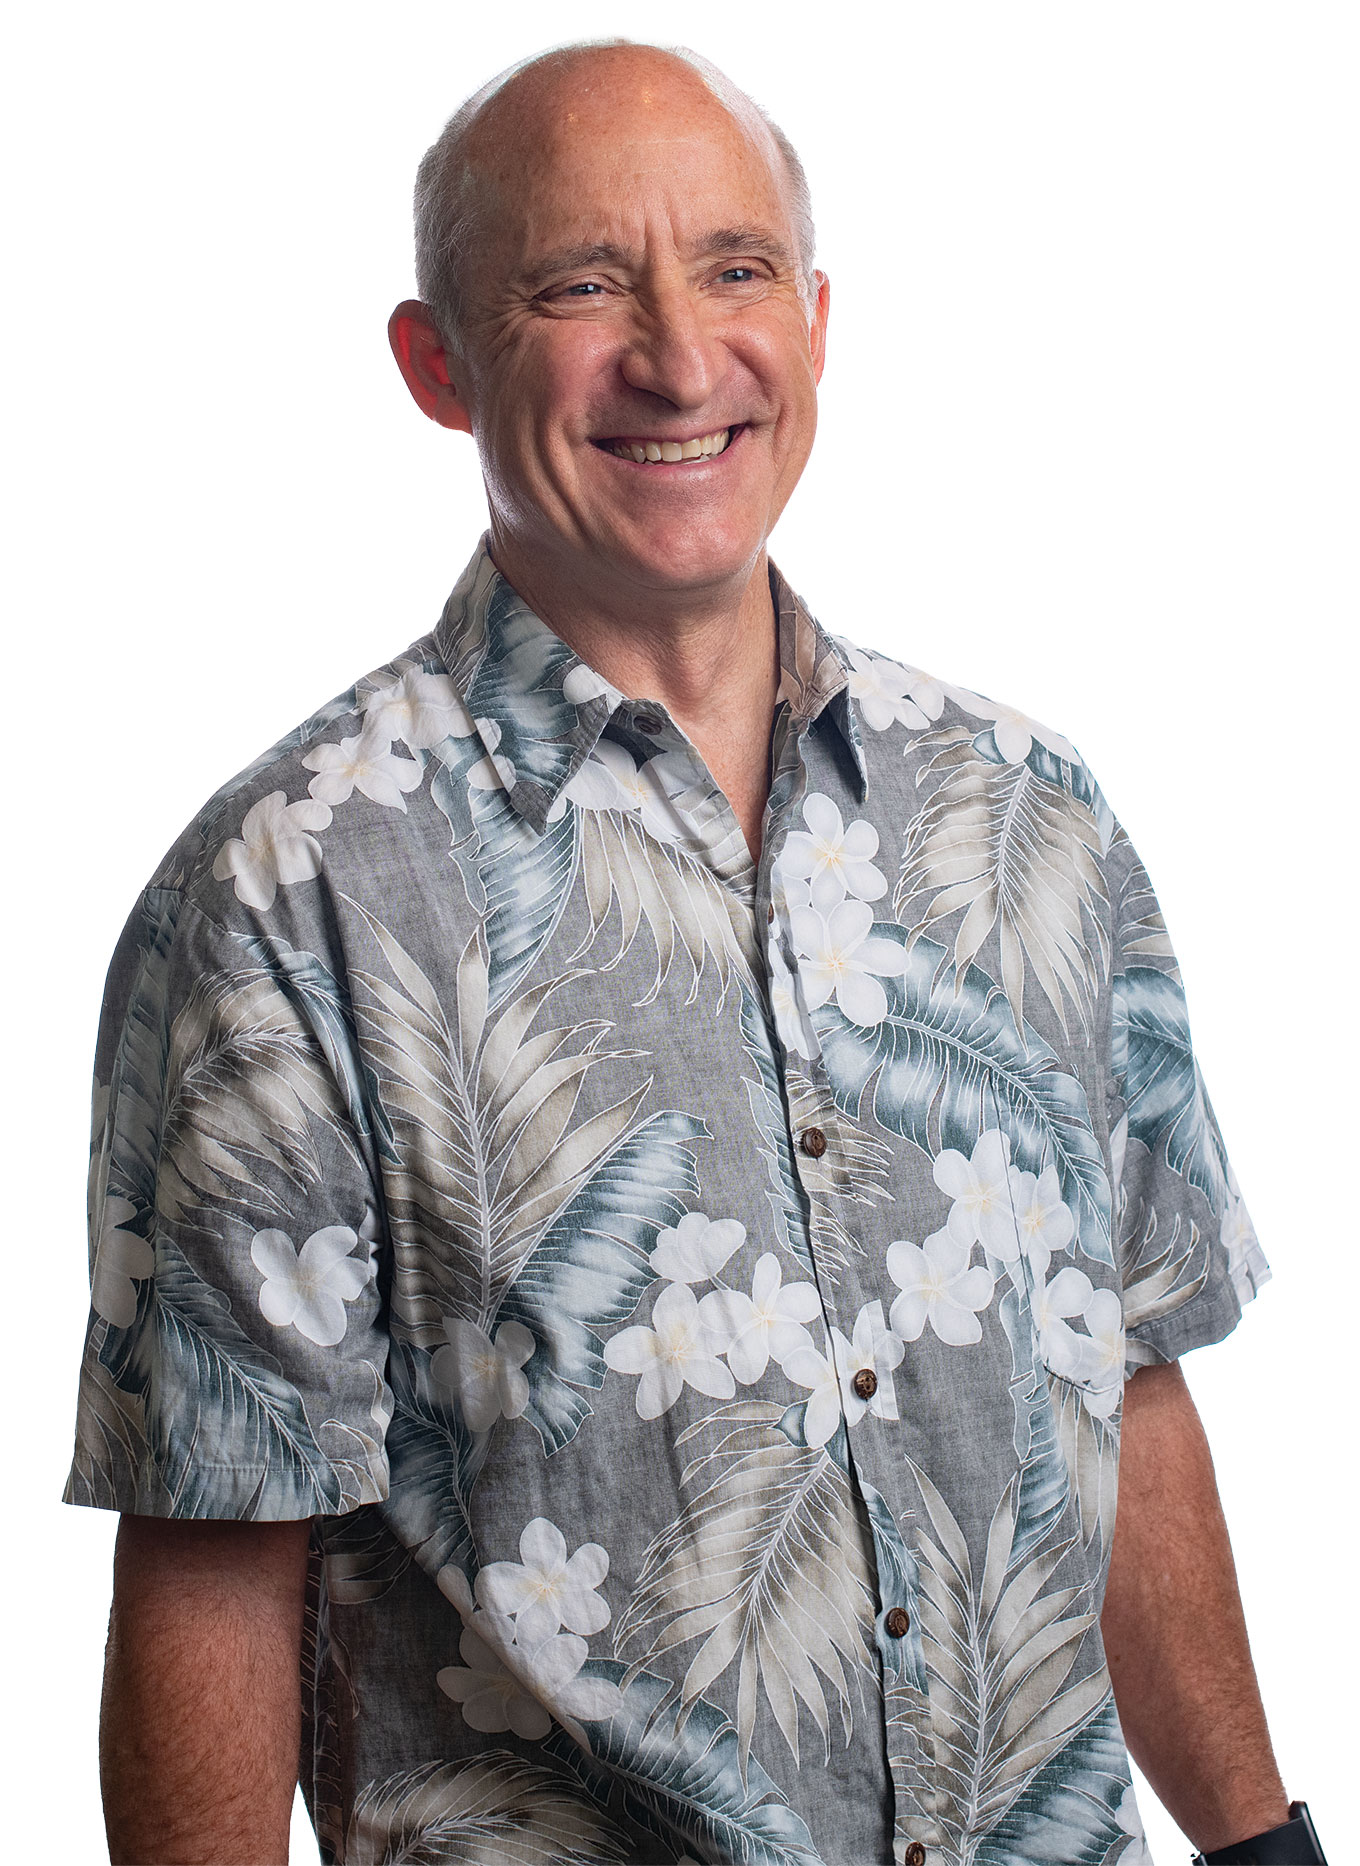 Rick Reidy, University Distinguished Teaching Professor of materials science and engineering